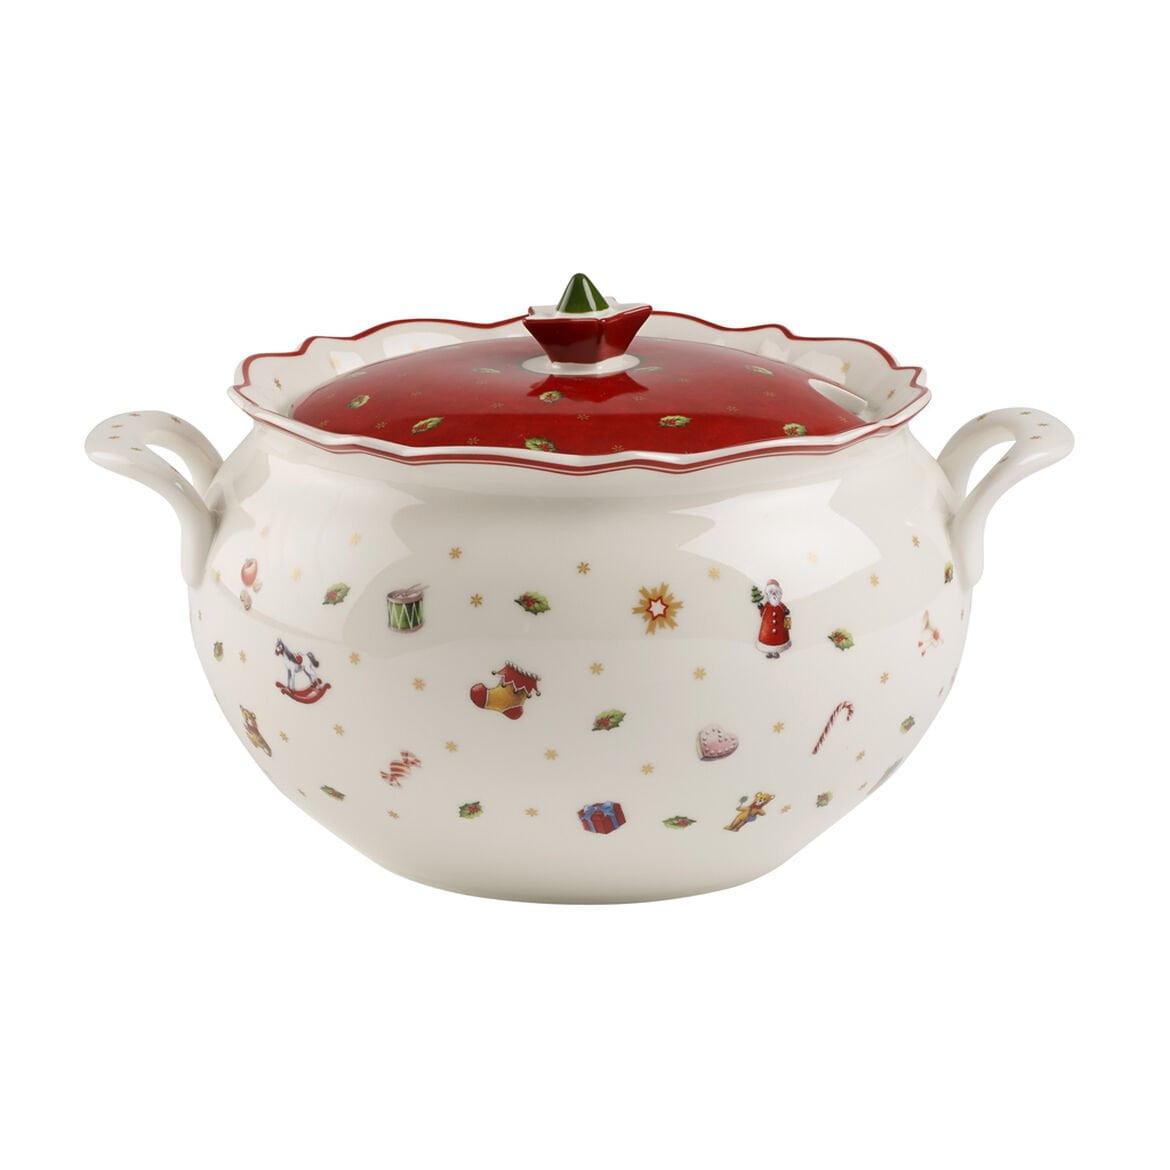 Floral Double-Eared Soup Bowls - Ceramic - Red - Green - 4 Colors -  ApolloBox